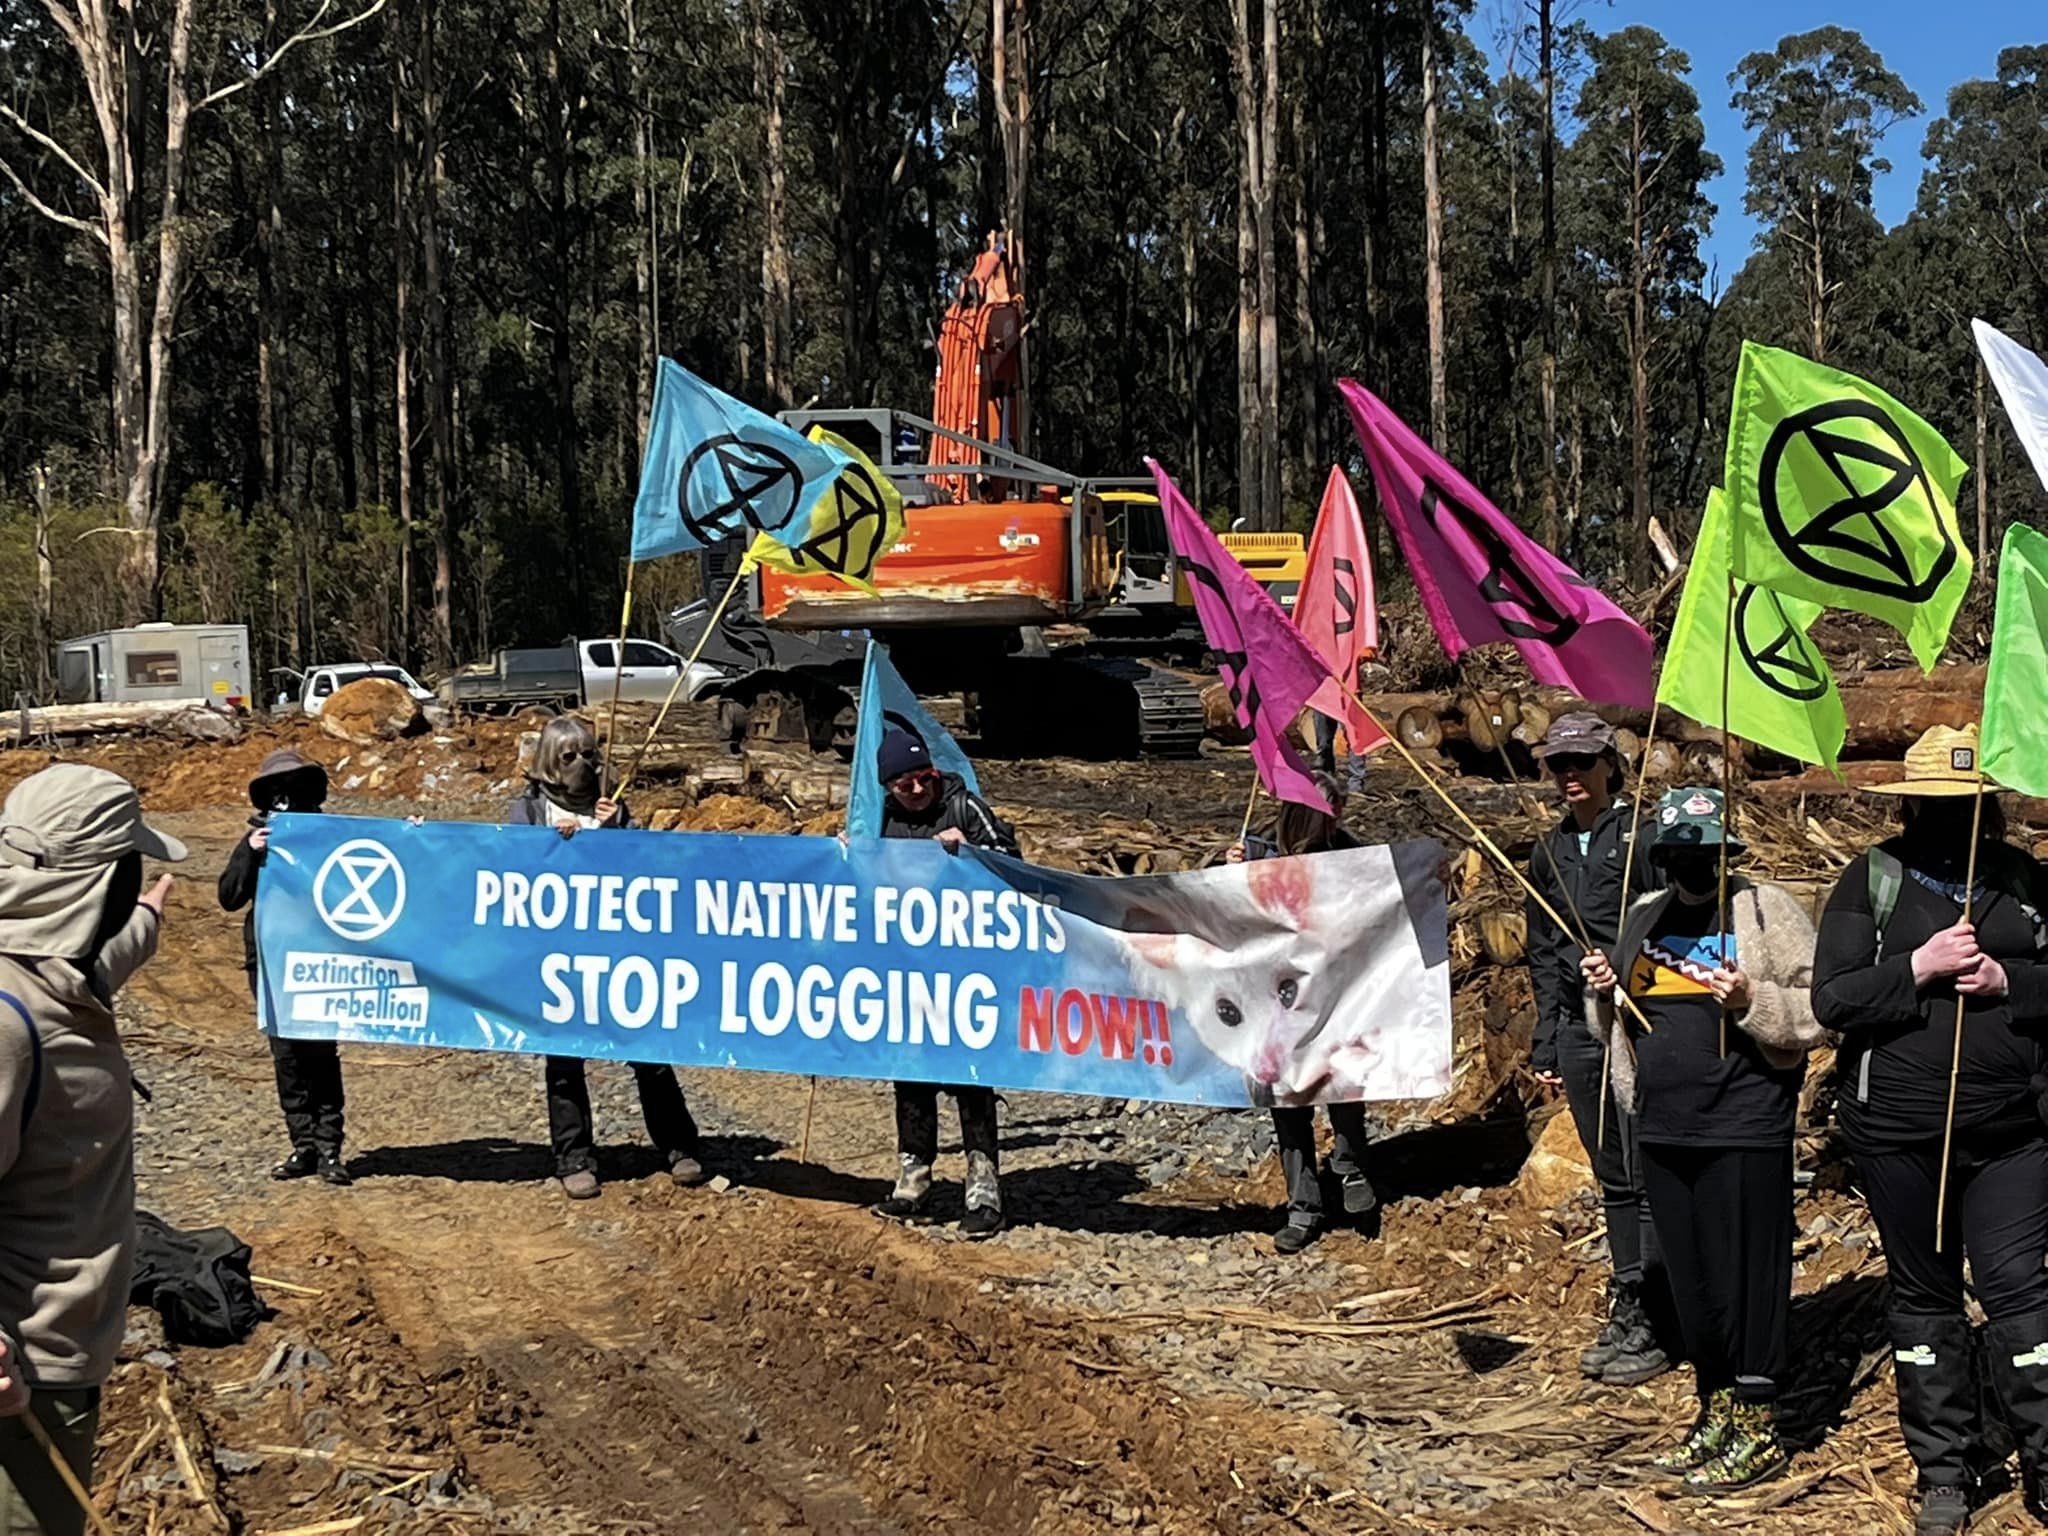 XR Stop Logging Now. "We are living like aliens in this country"